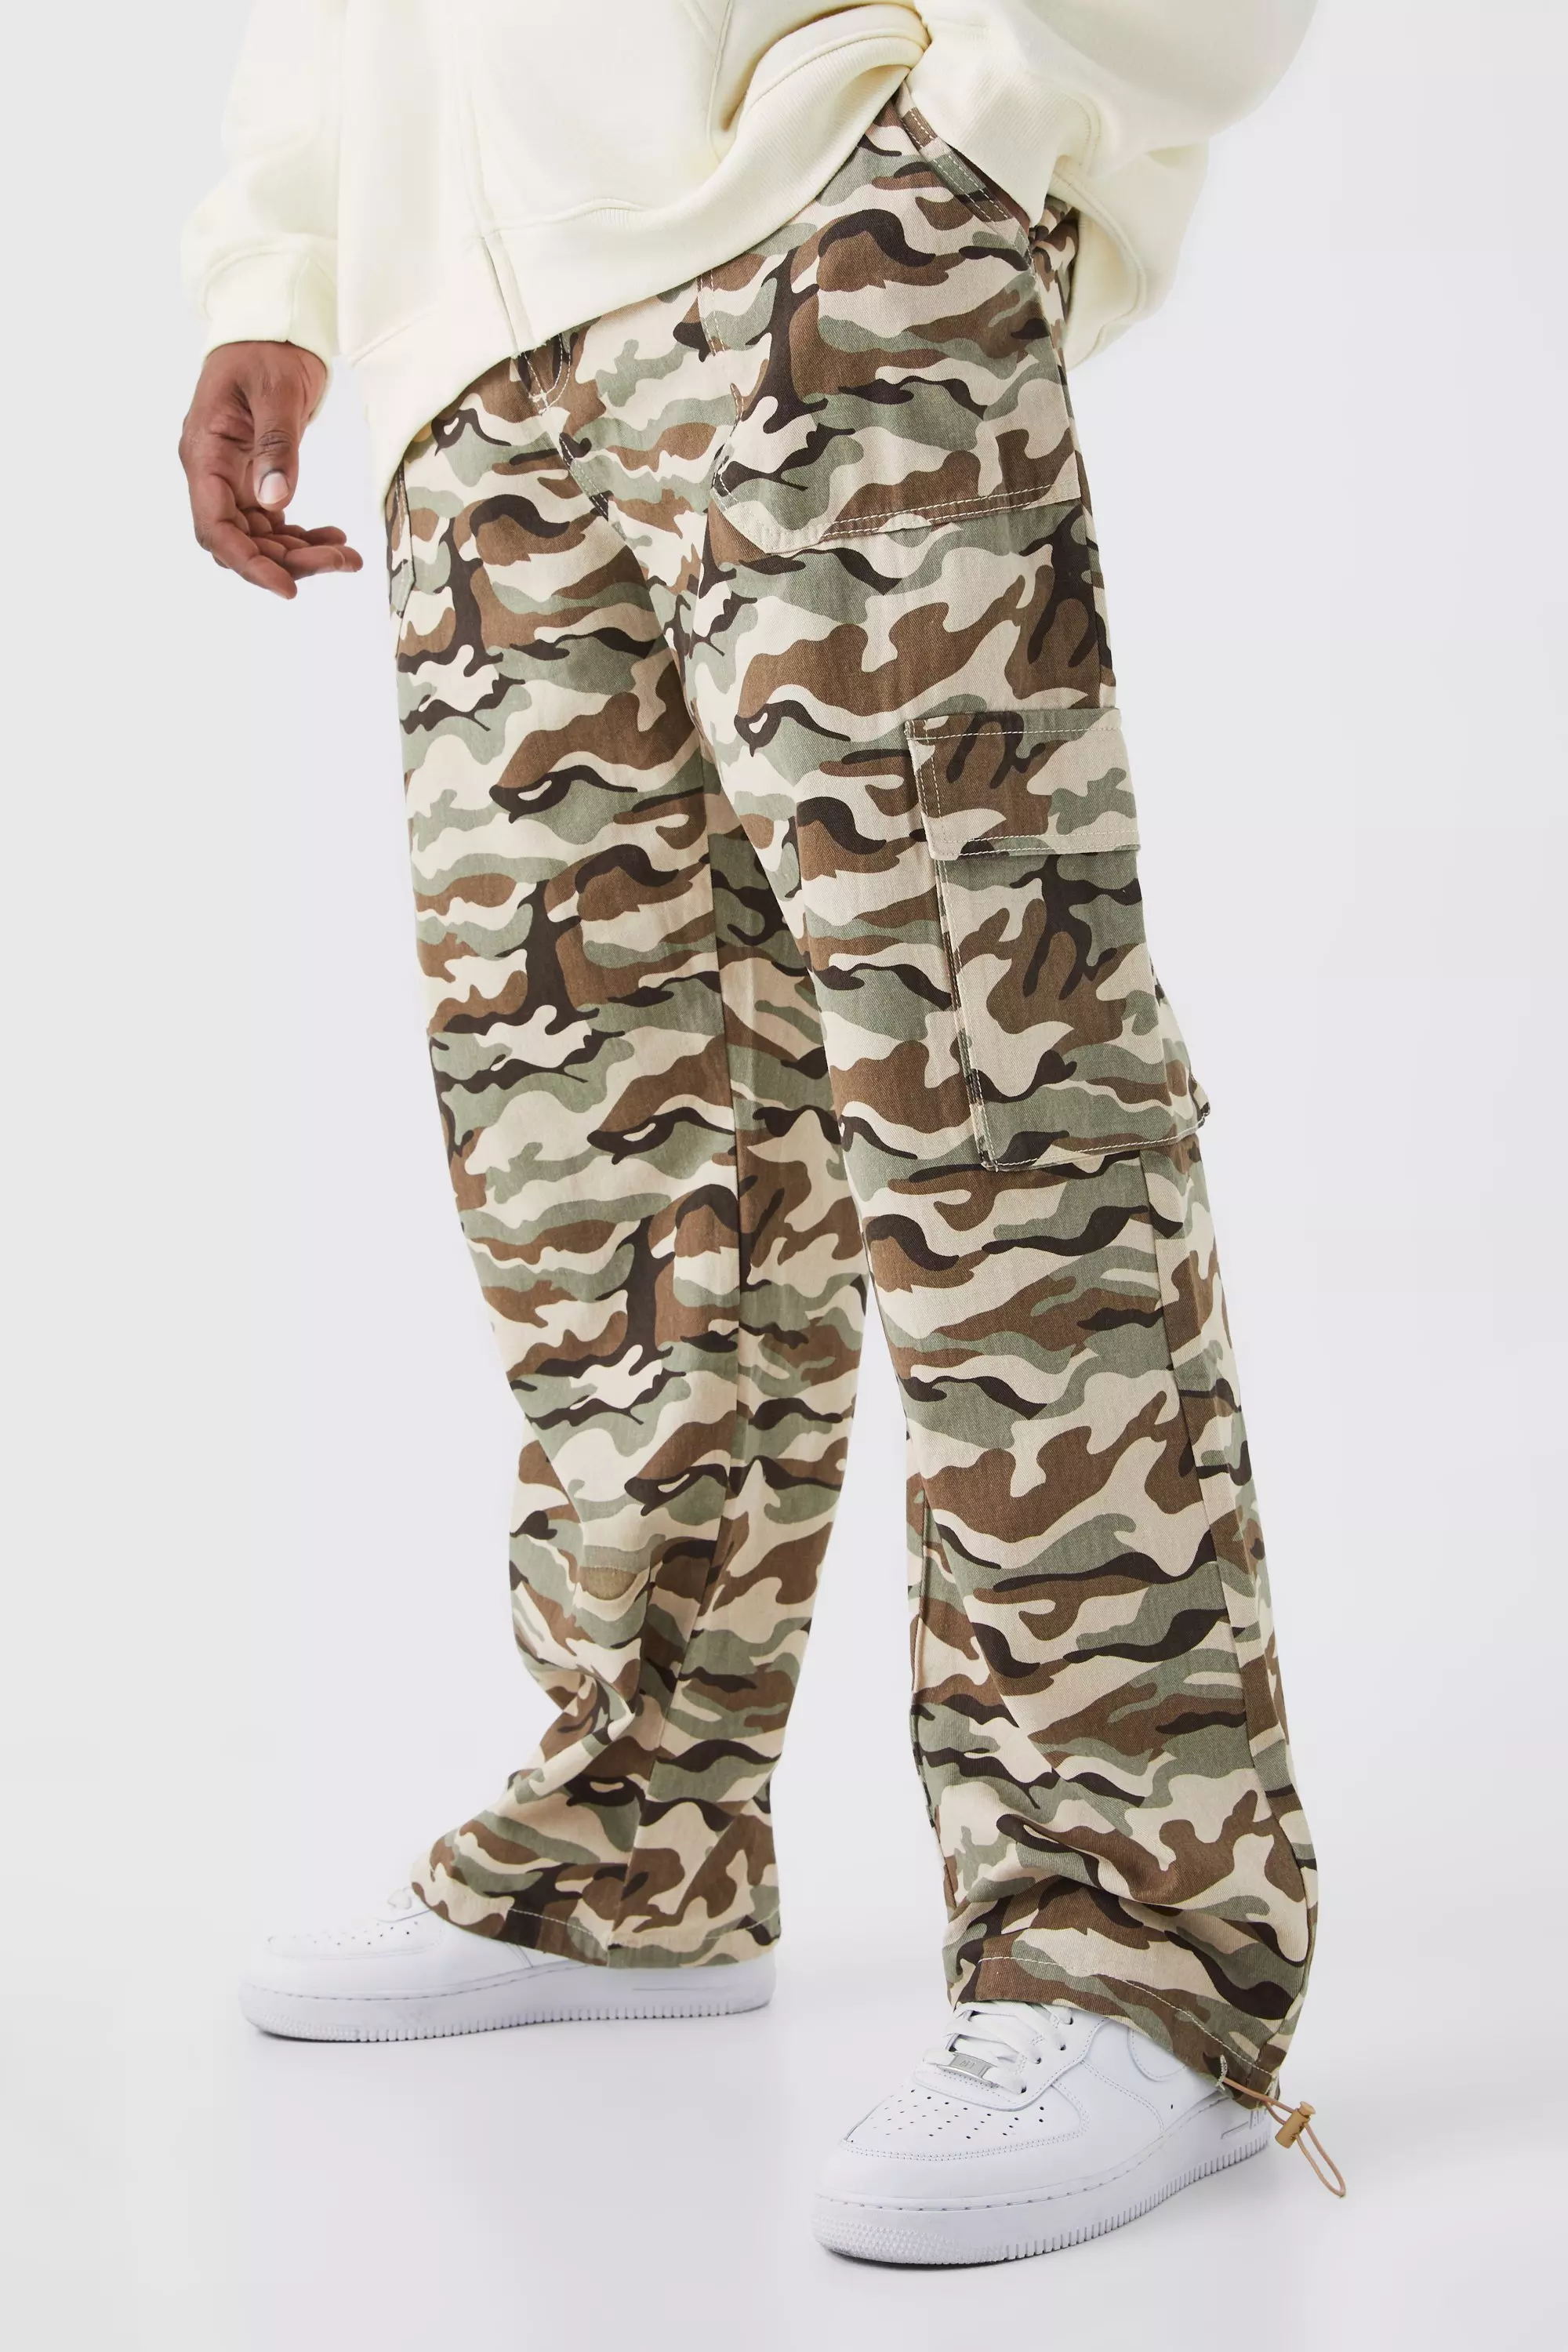 Sand Beige Plus Relaxed Cargo Pocket Camo Pants